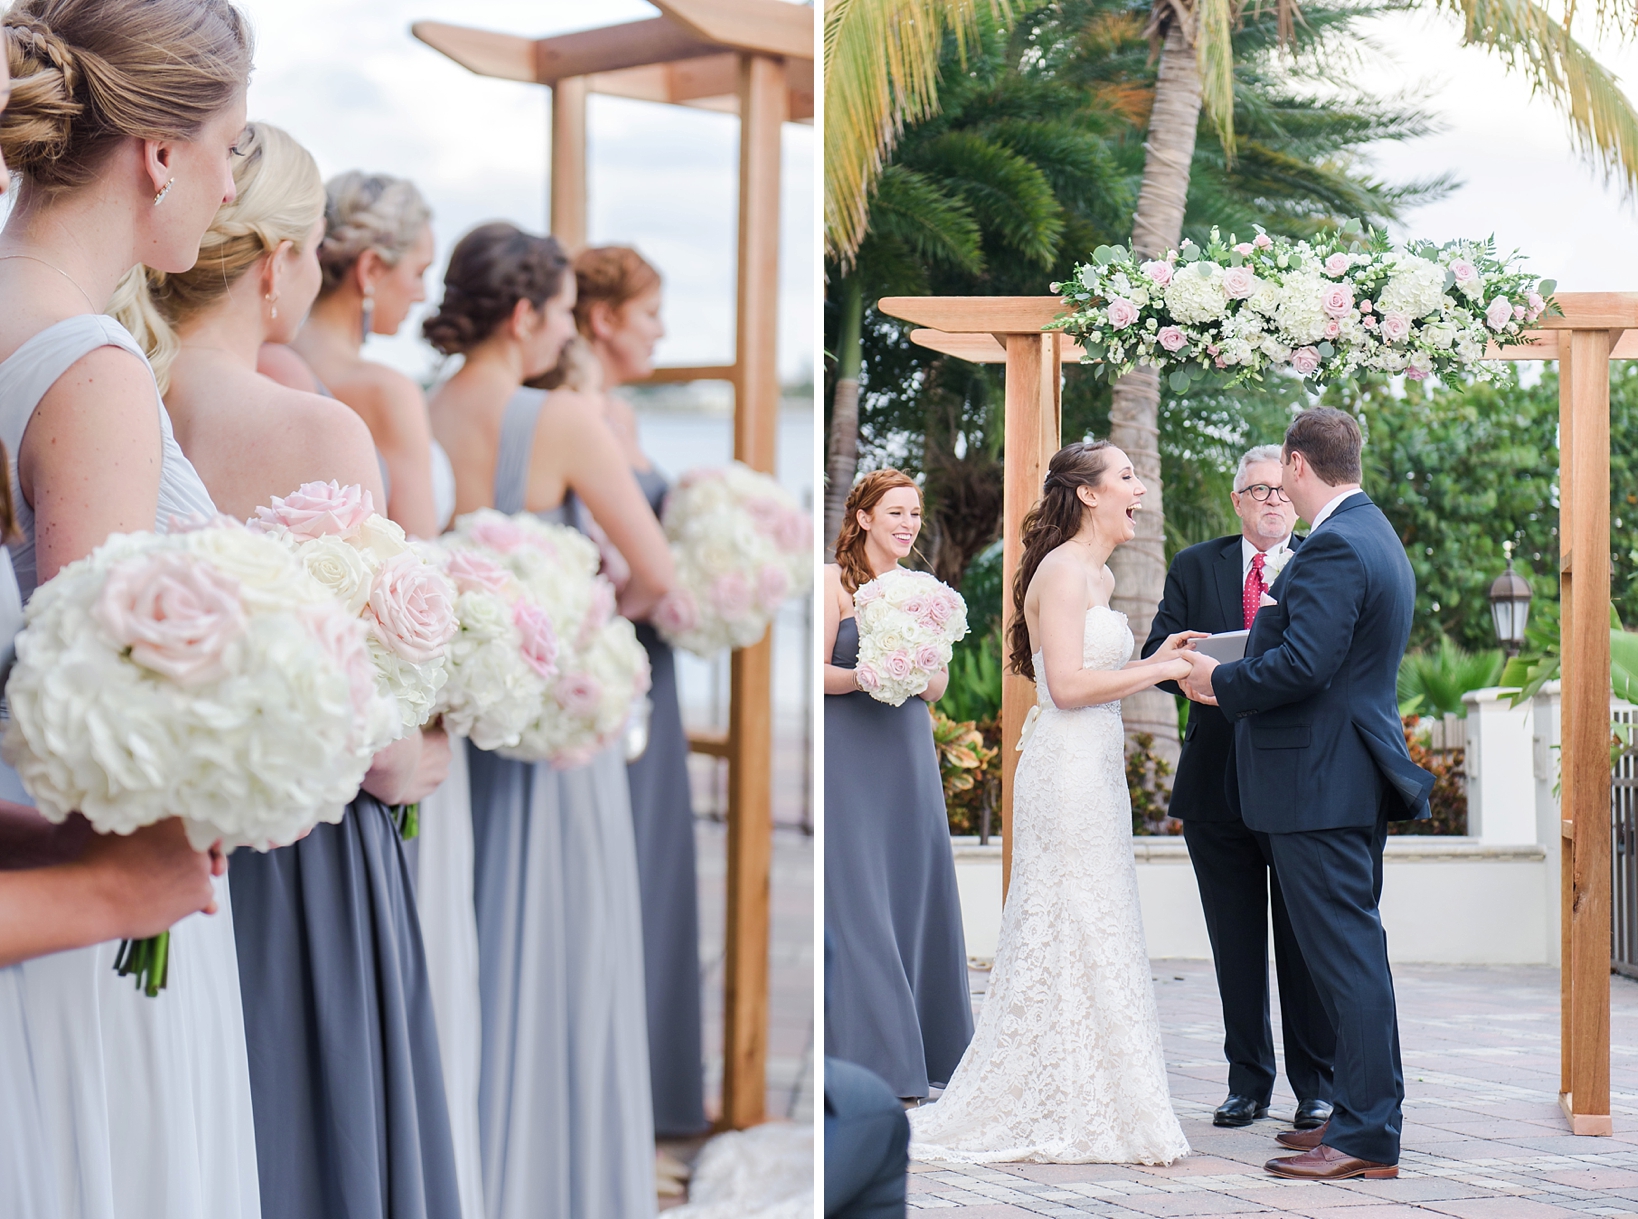 Floral details of the bridesmaids and a fun moment shared during the ceremony